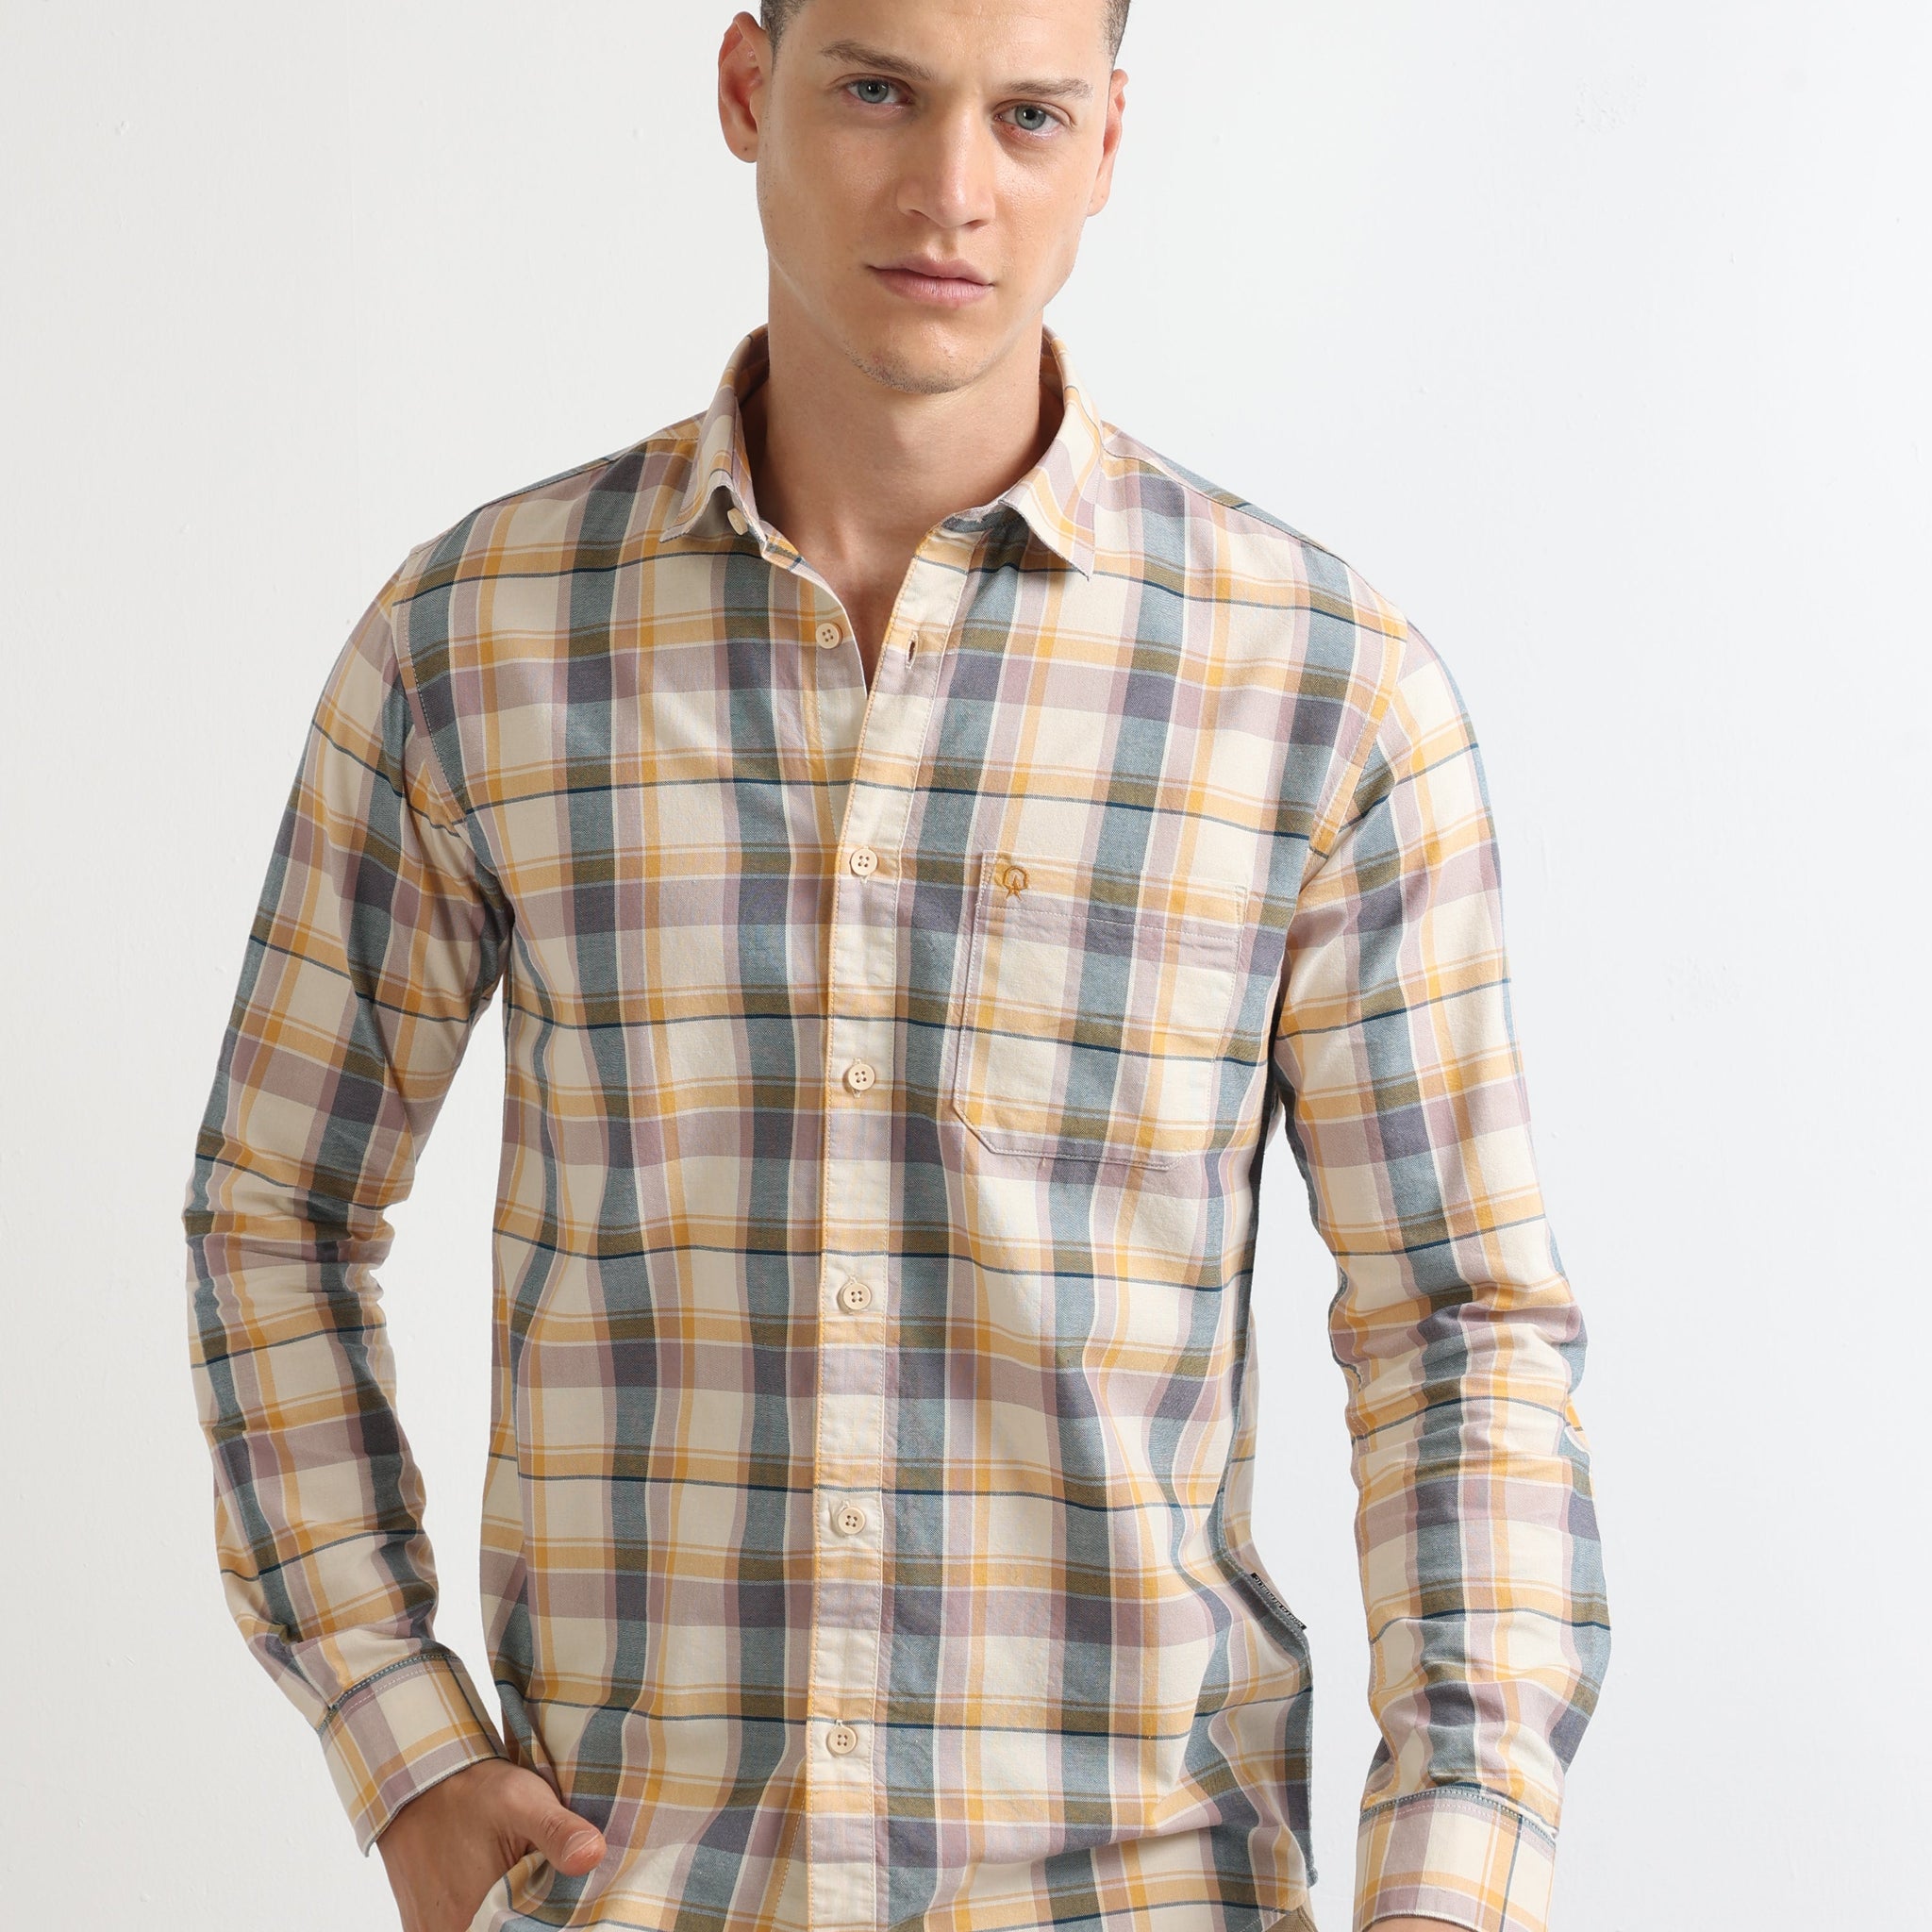 Buy Single Pocket Smart Casual Oxford Checked Shirt Online